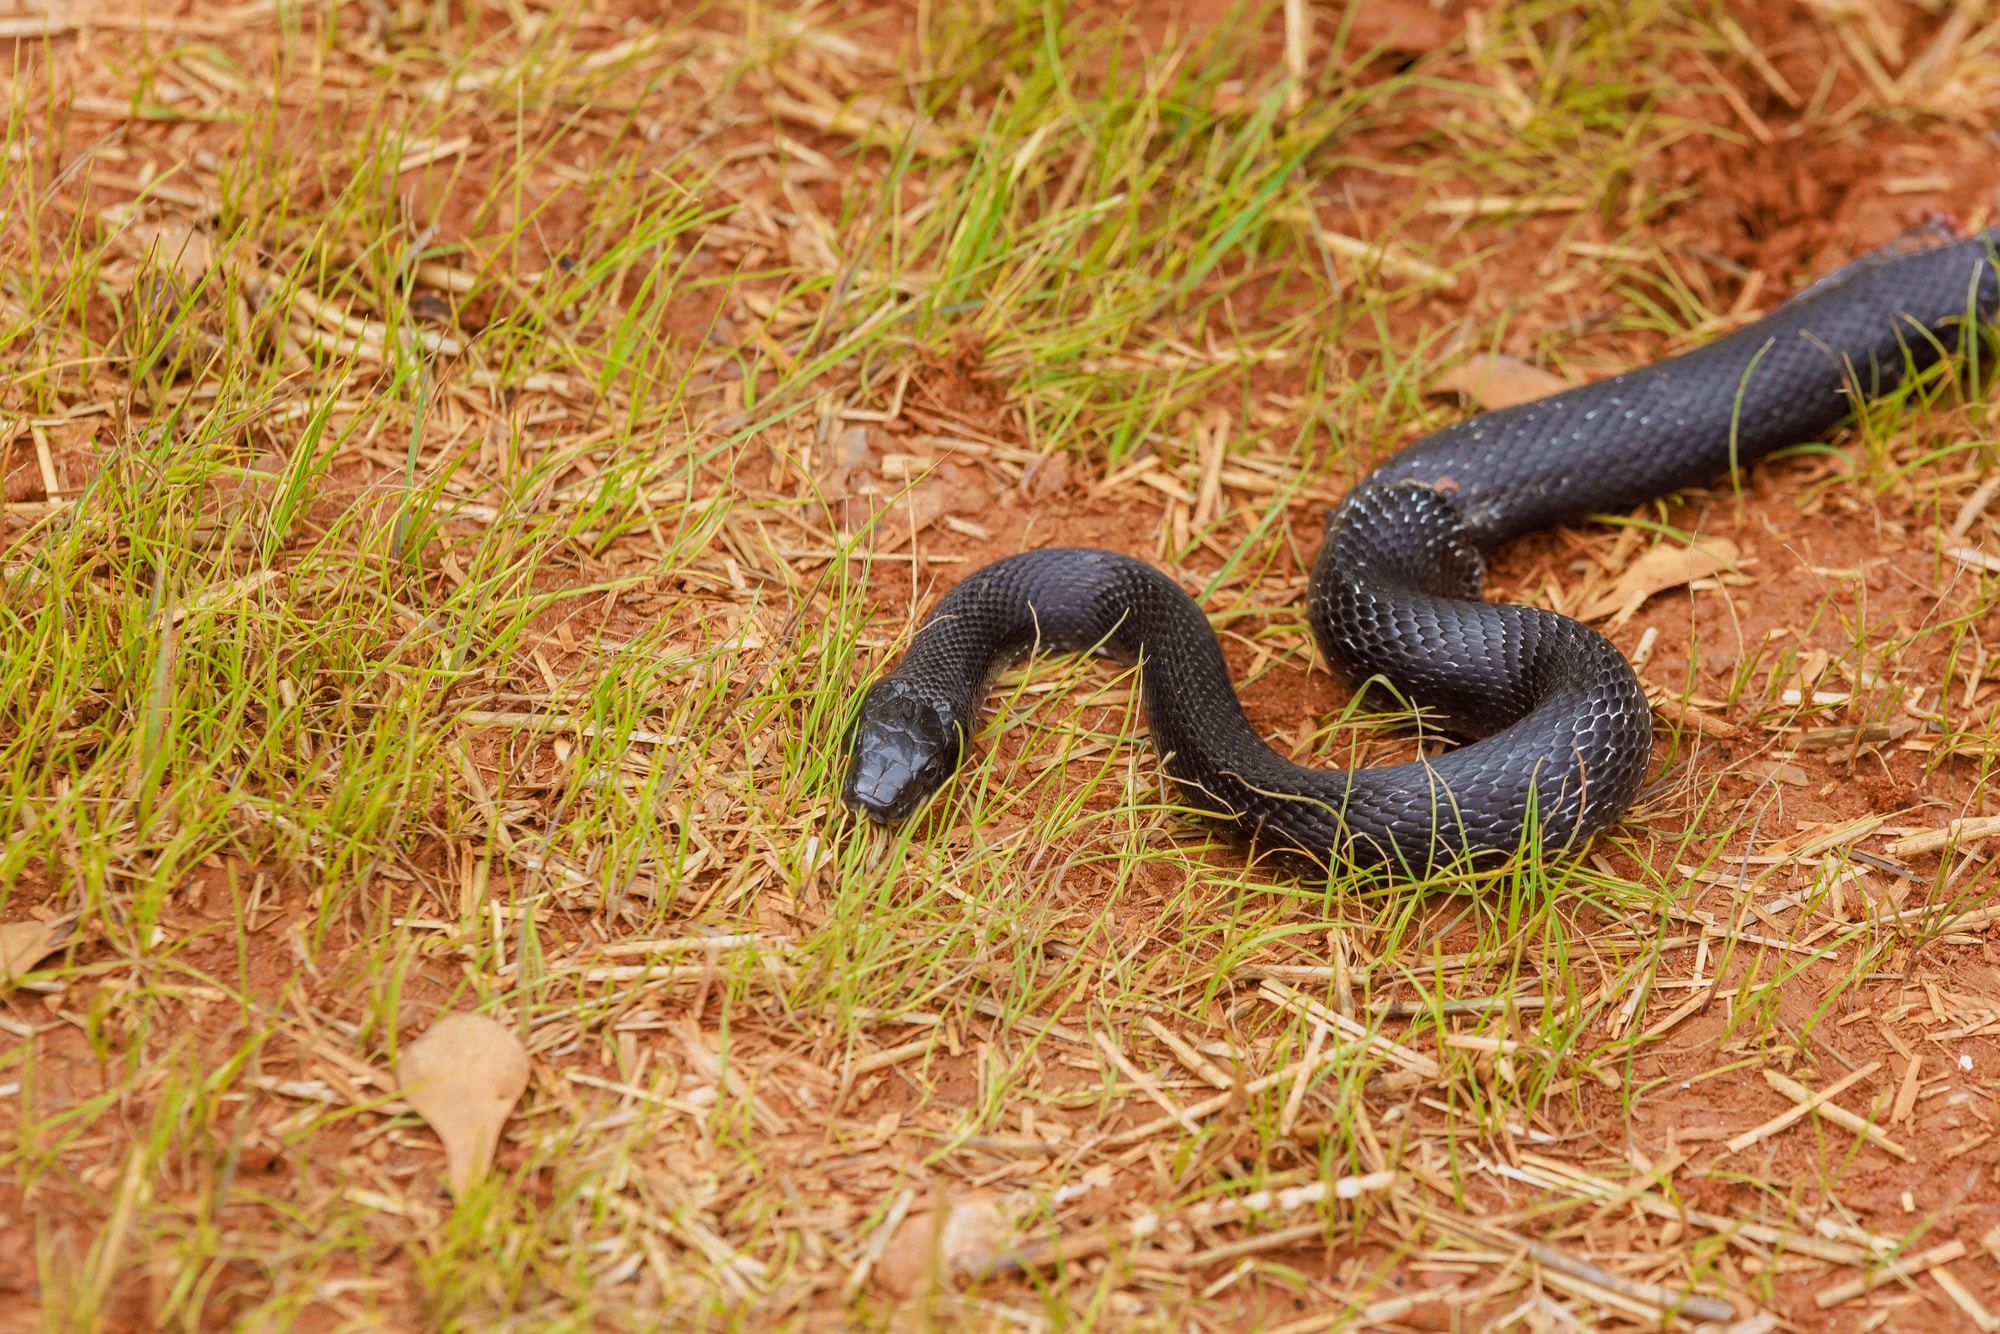 A black rat snack slithering through the forest floor.